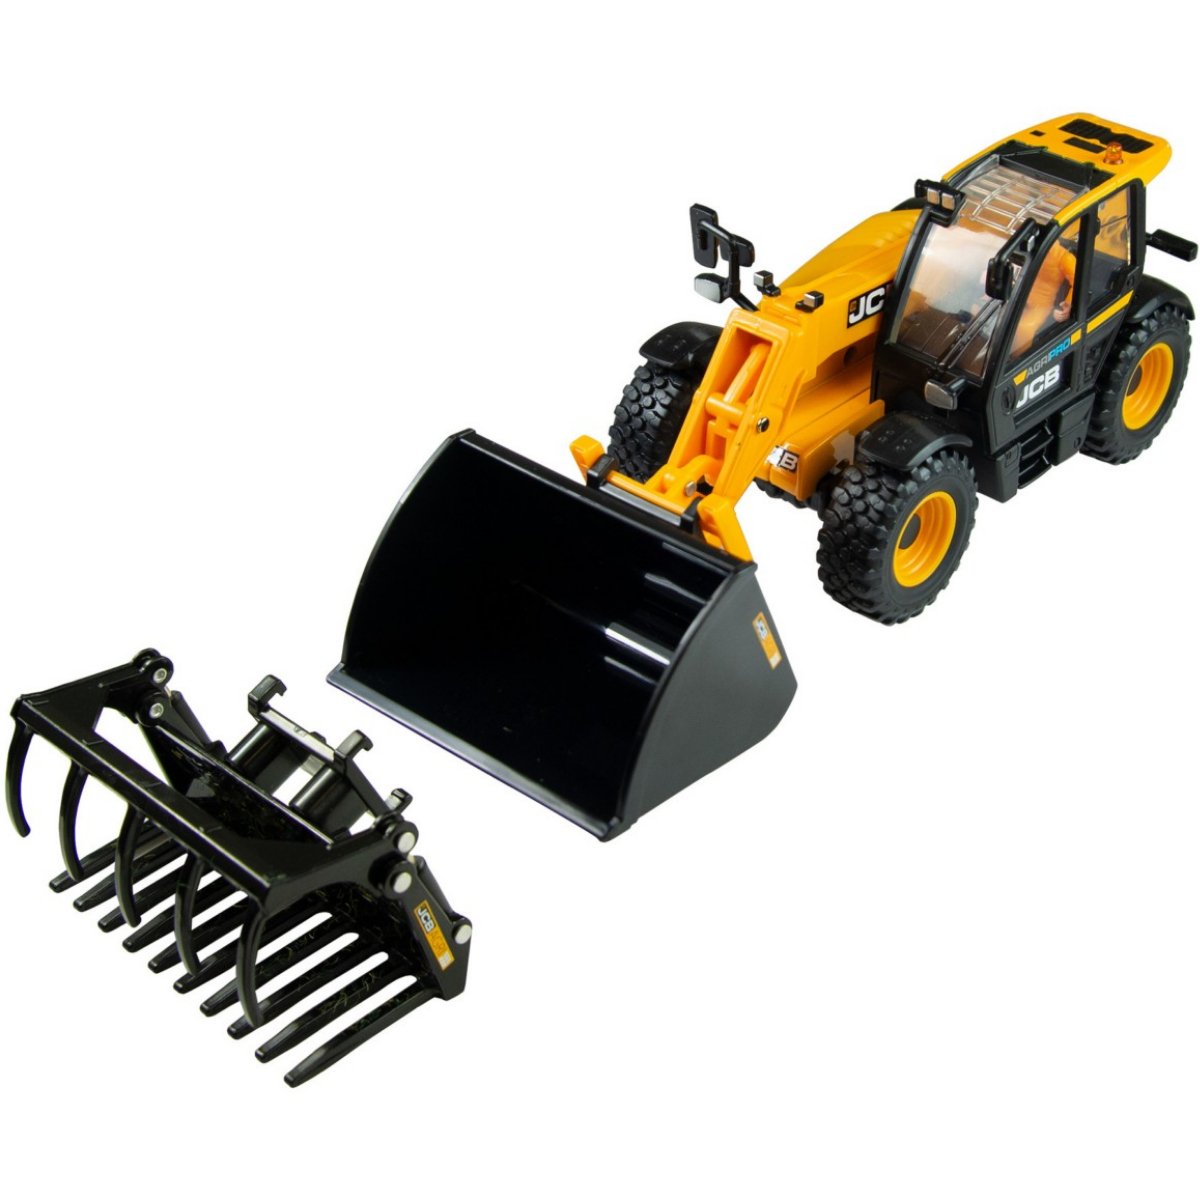 Britains JCB 542-70 Agrixtra Loadall - 1:32 Scale - Phillips Hobbies